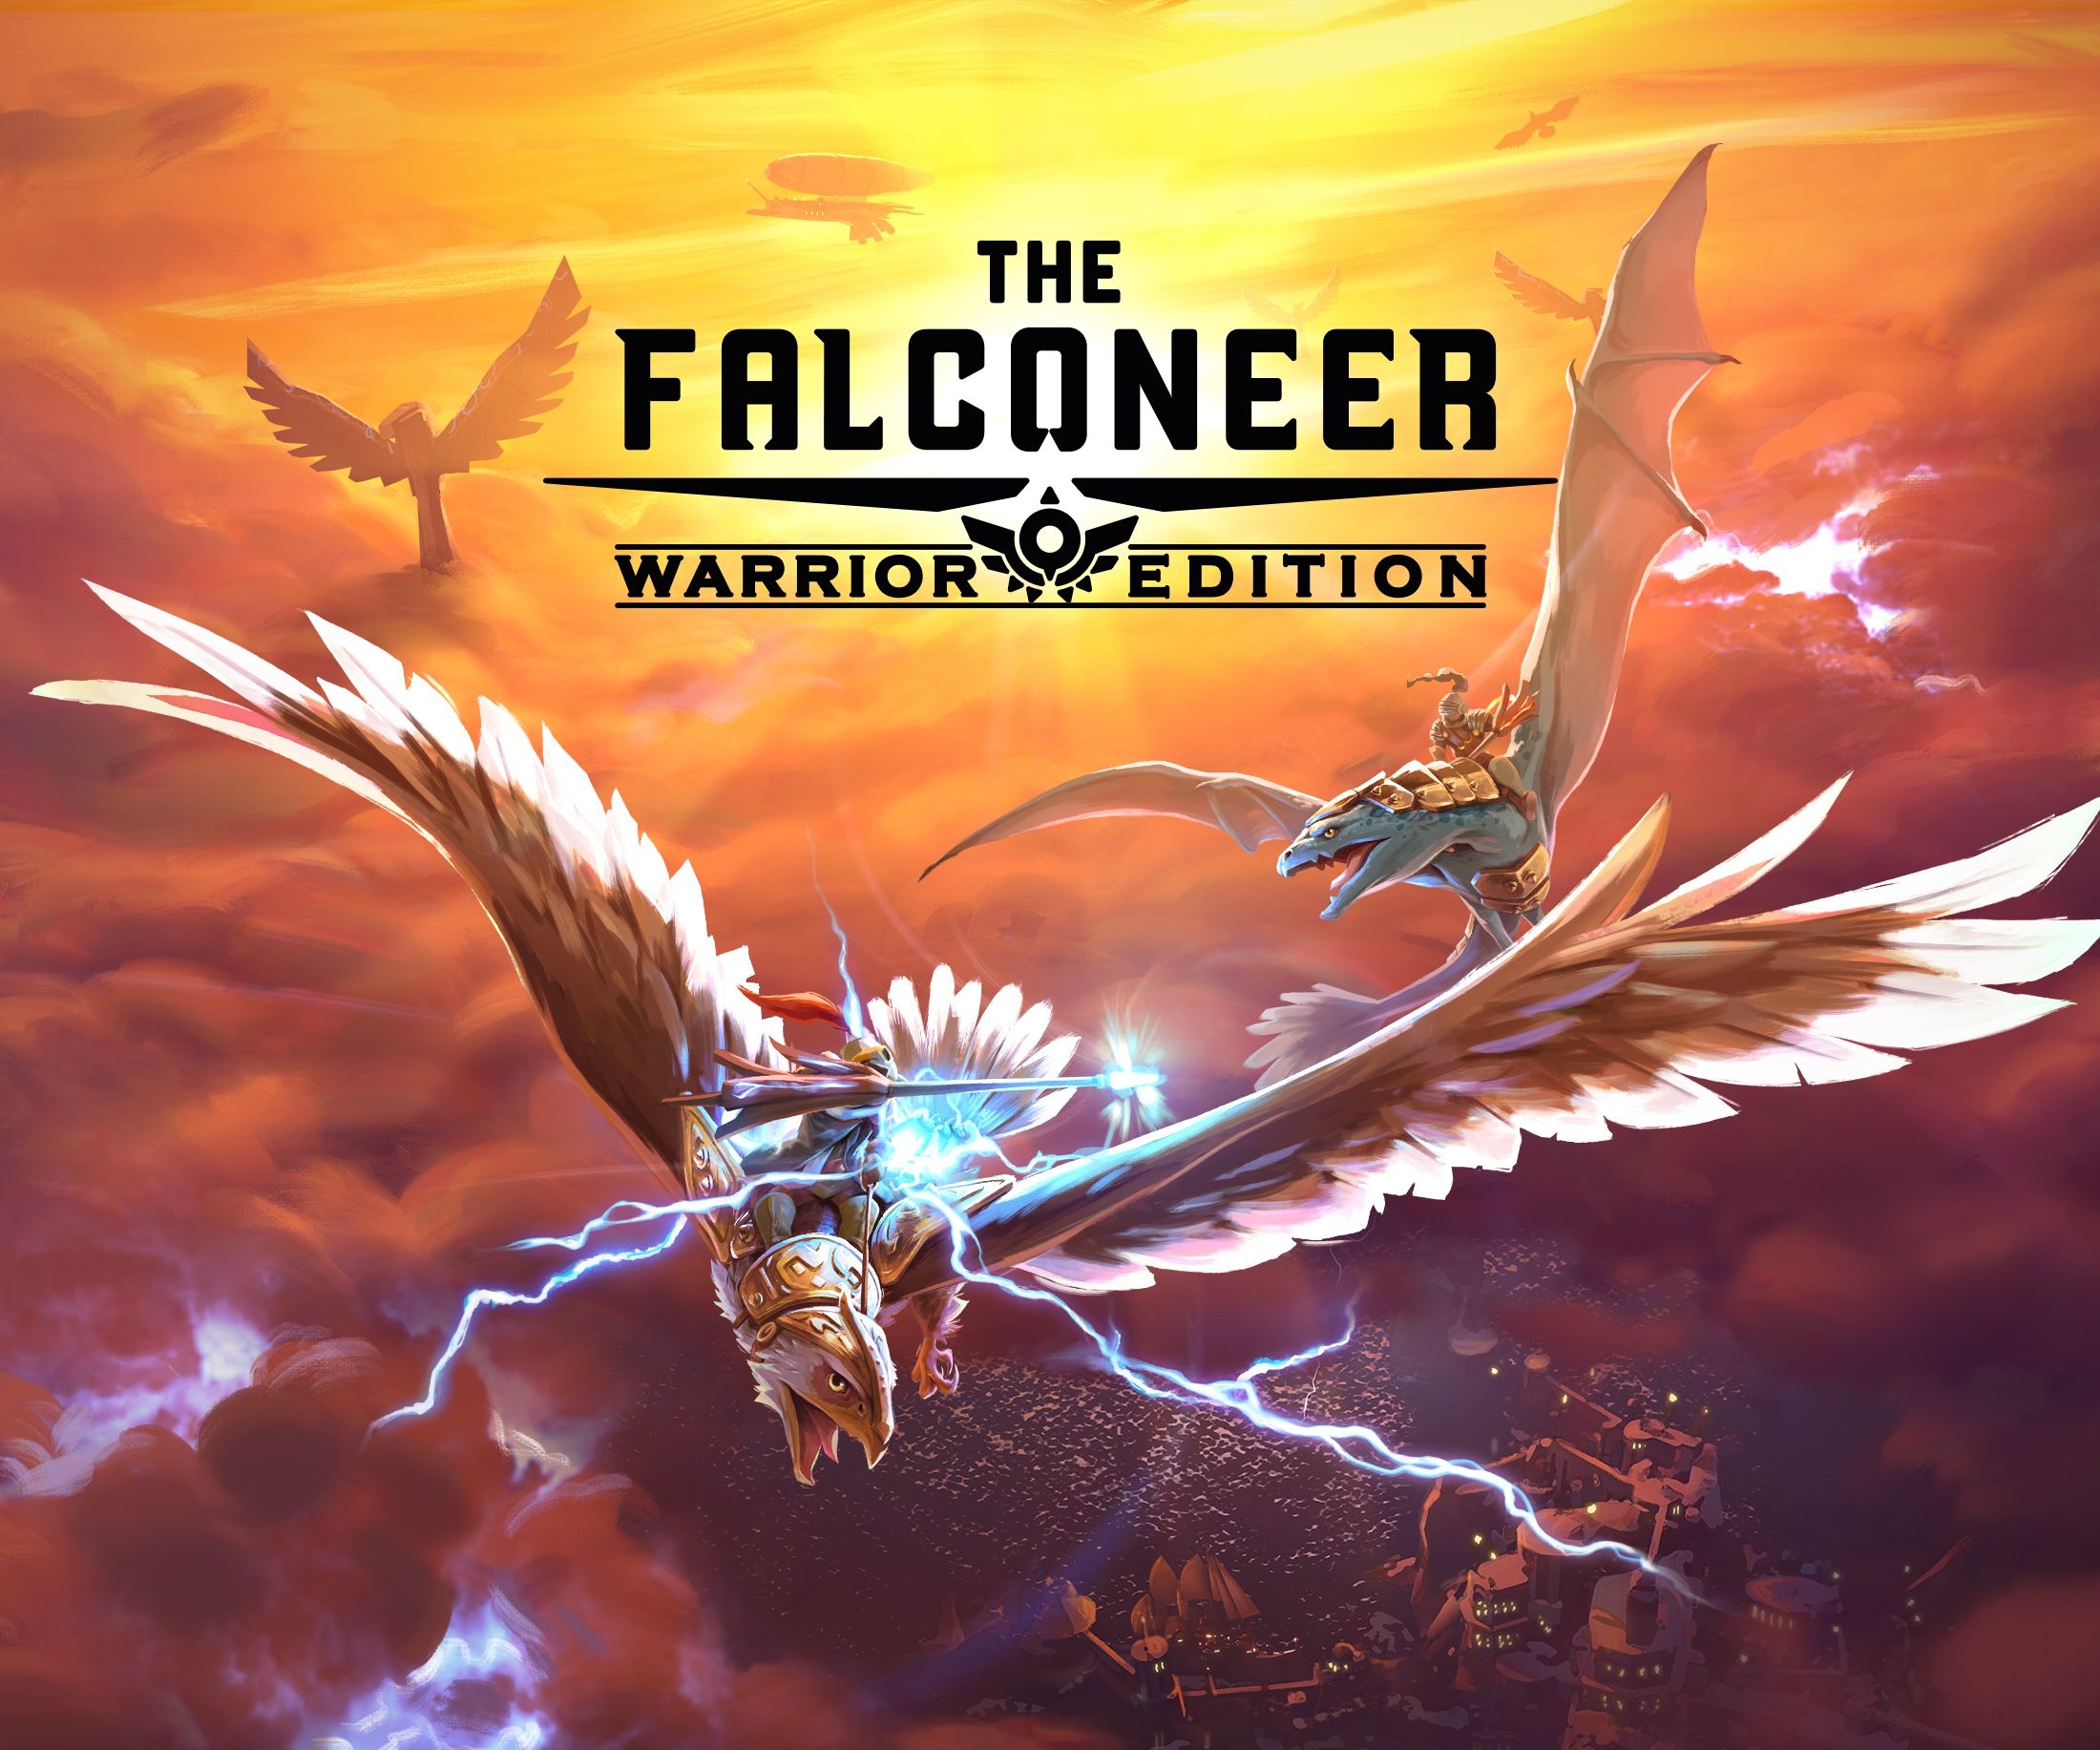 The Falconeer 2020 Wallpapers